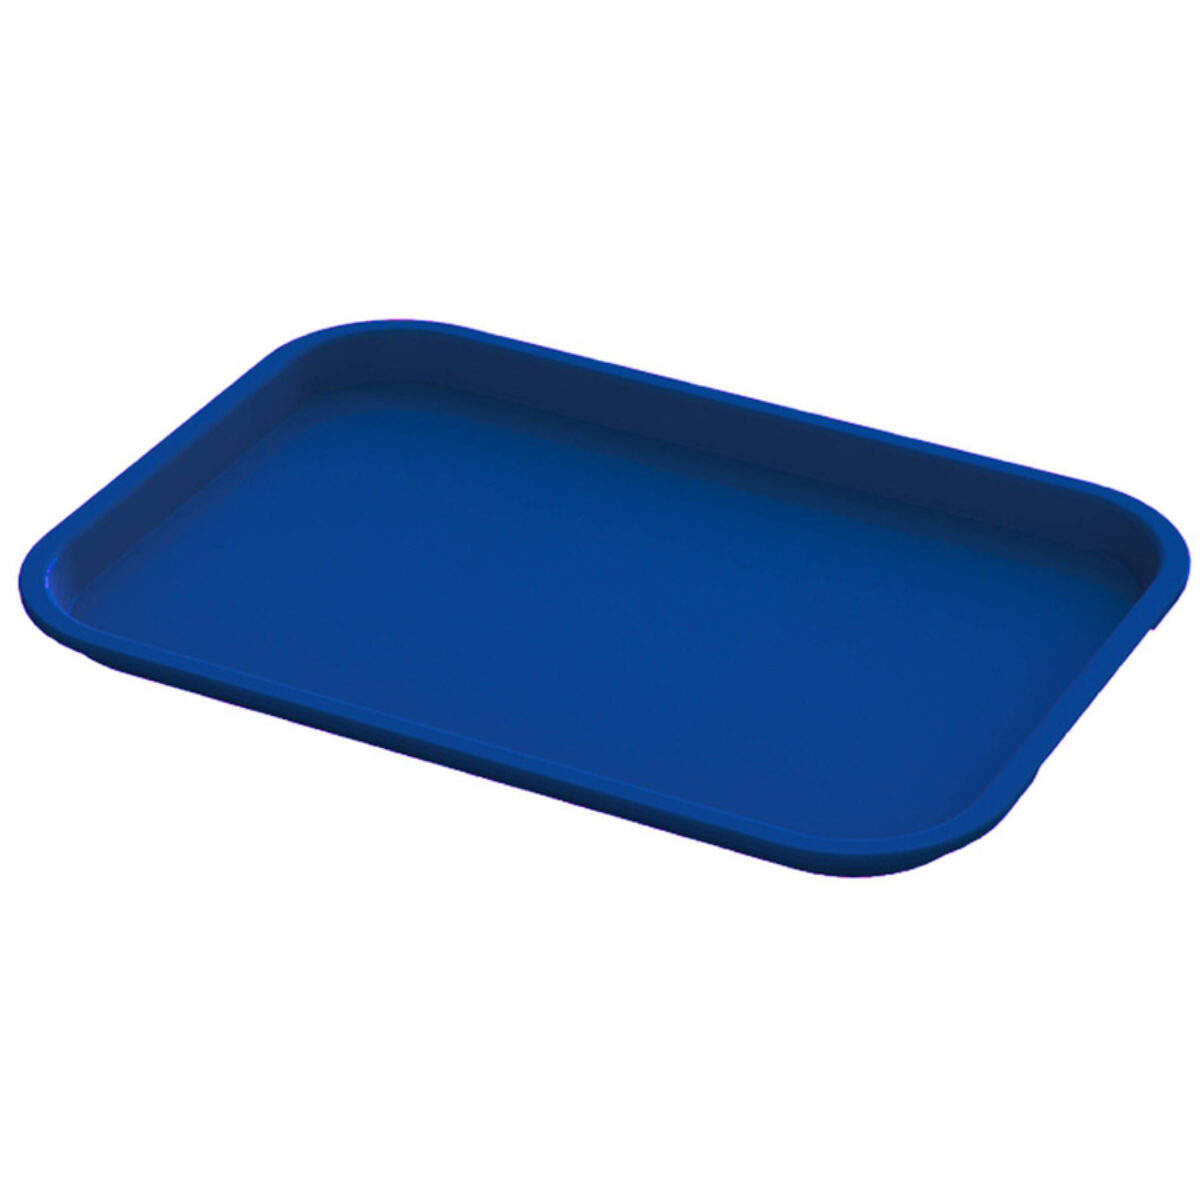 New Star Foodservice 24364 Blue Plastic Fast Food Tray, 10 by 14 Inch